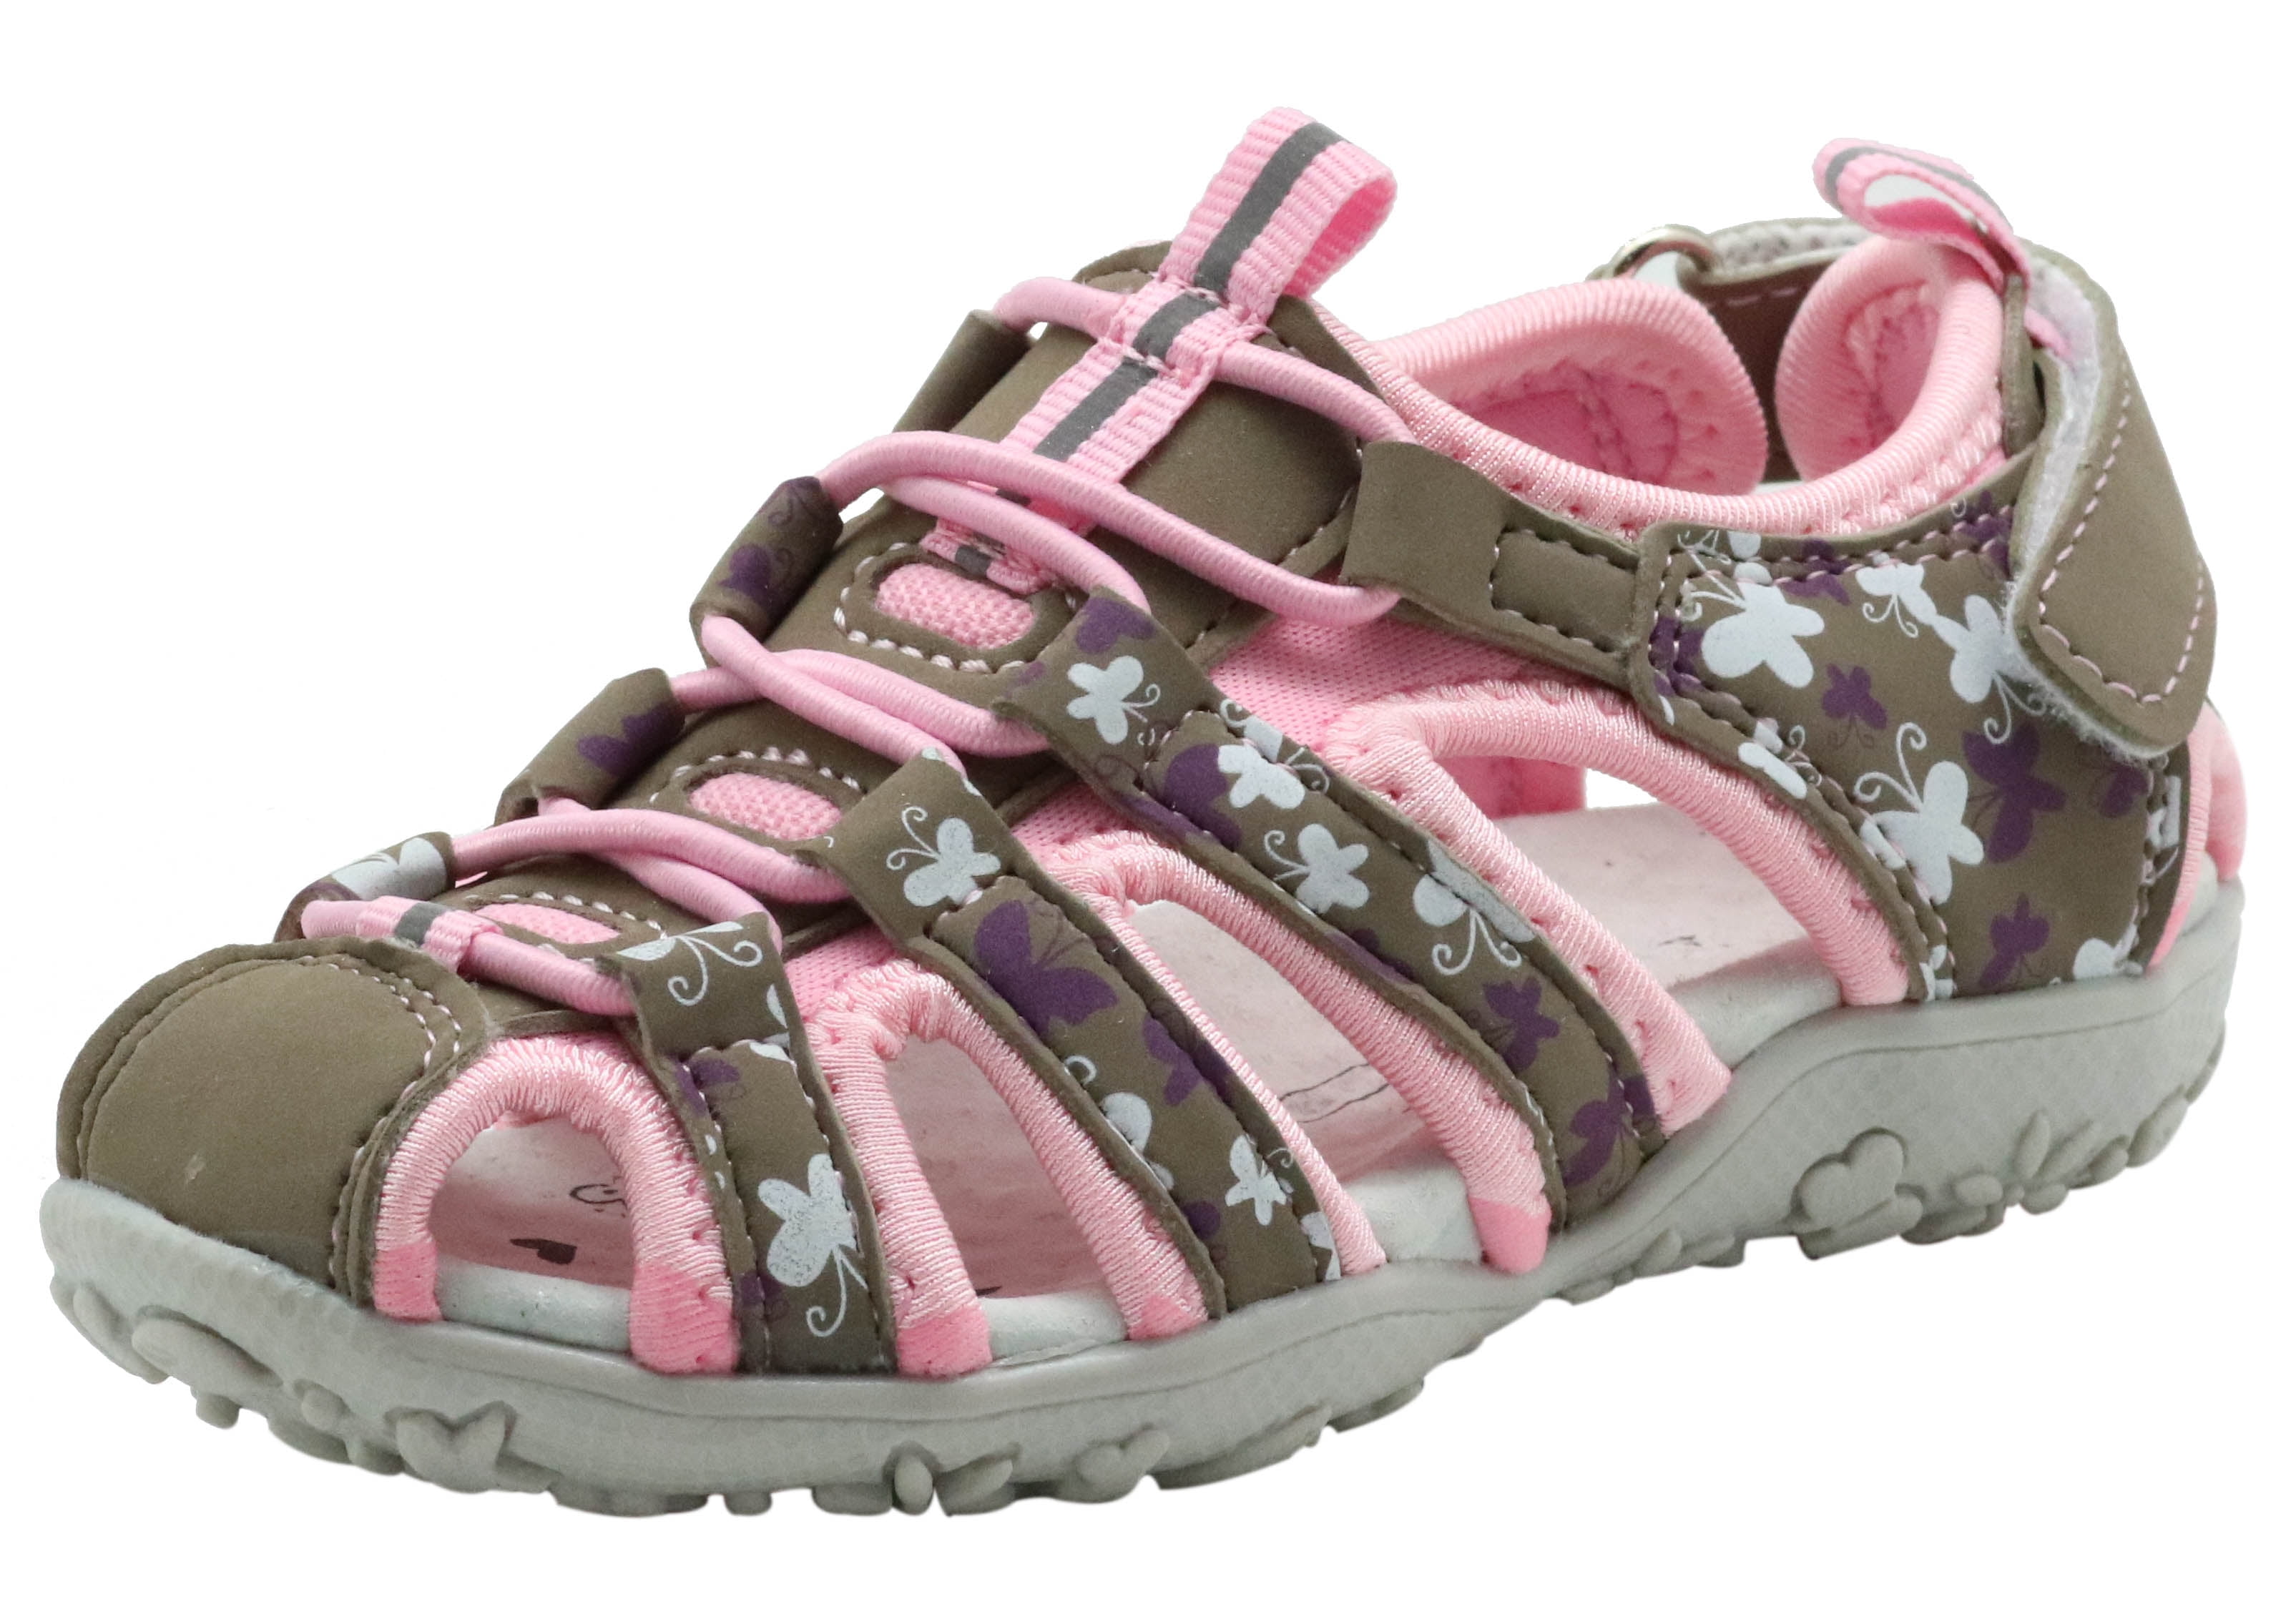 Toddler/Little Kid Apakowa Baby Girls Summer Cloesed Toe Sandals with Arch Support